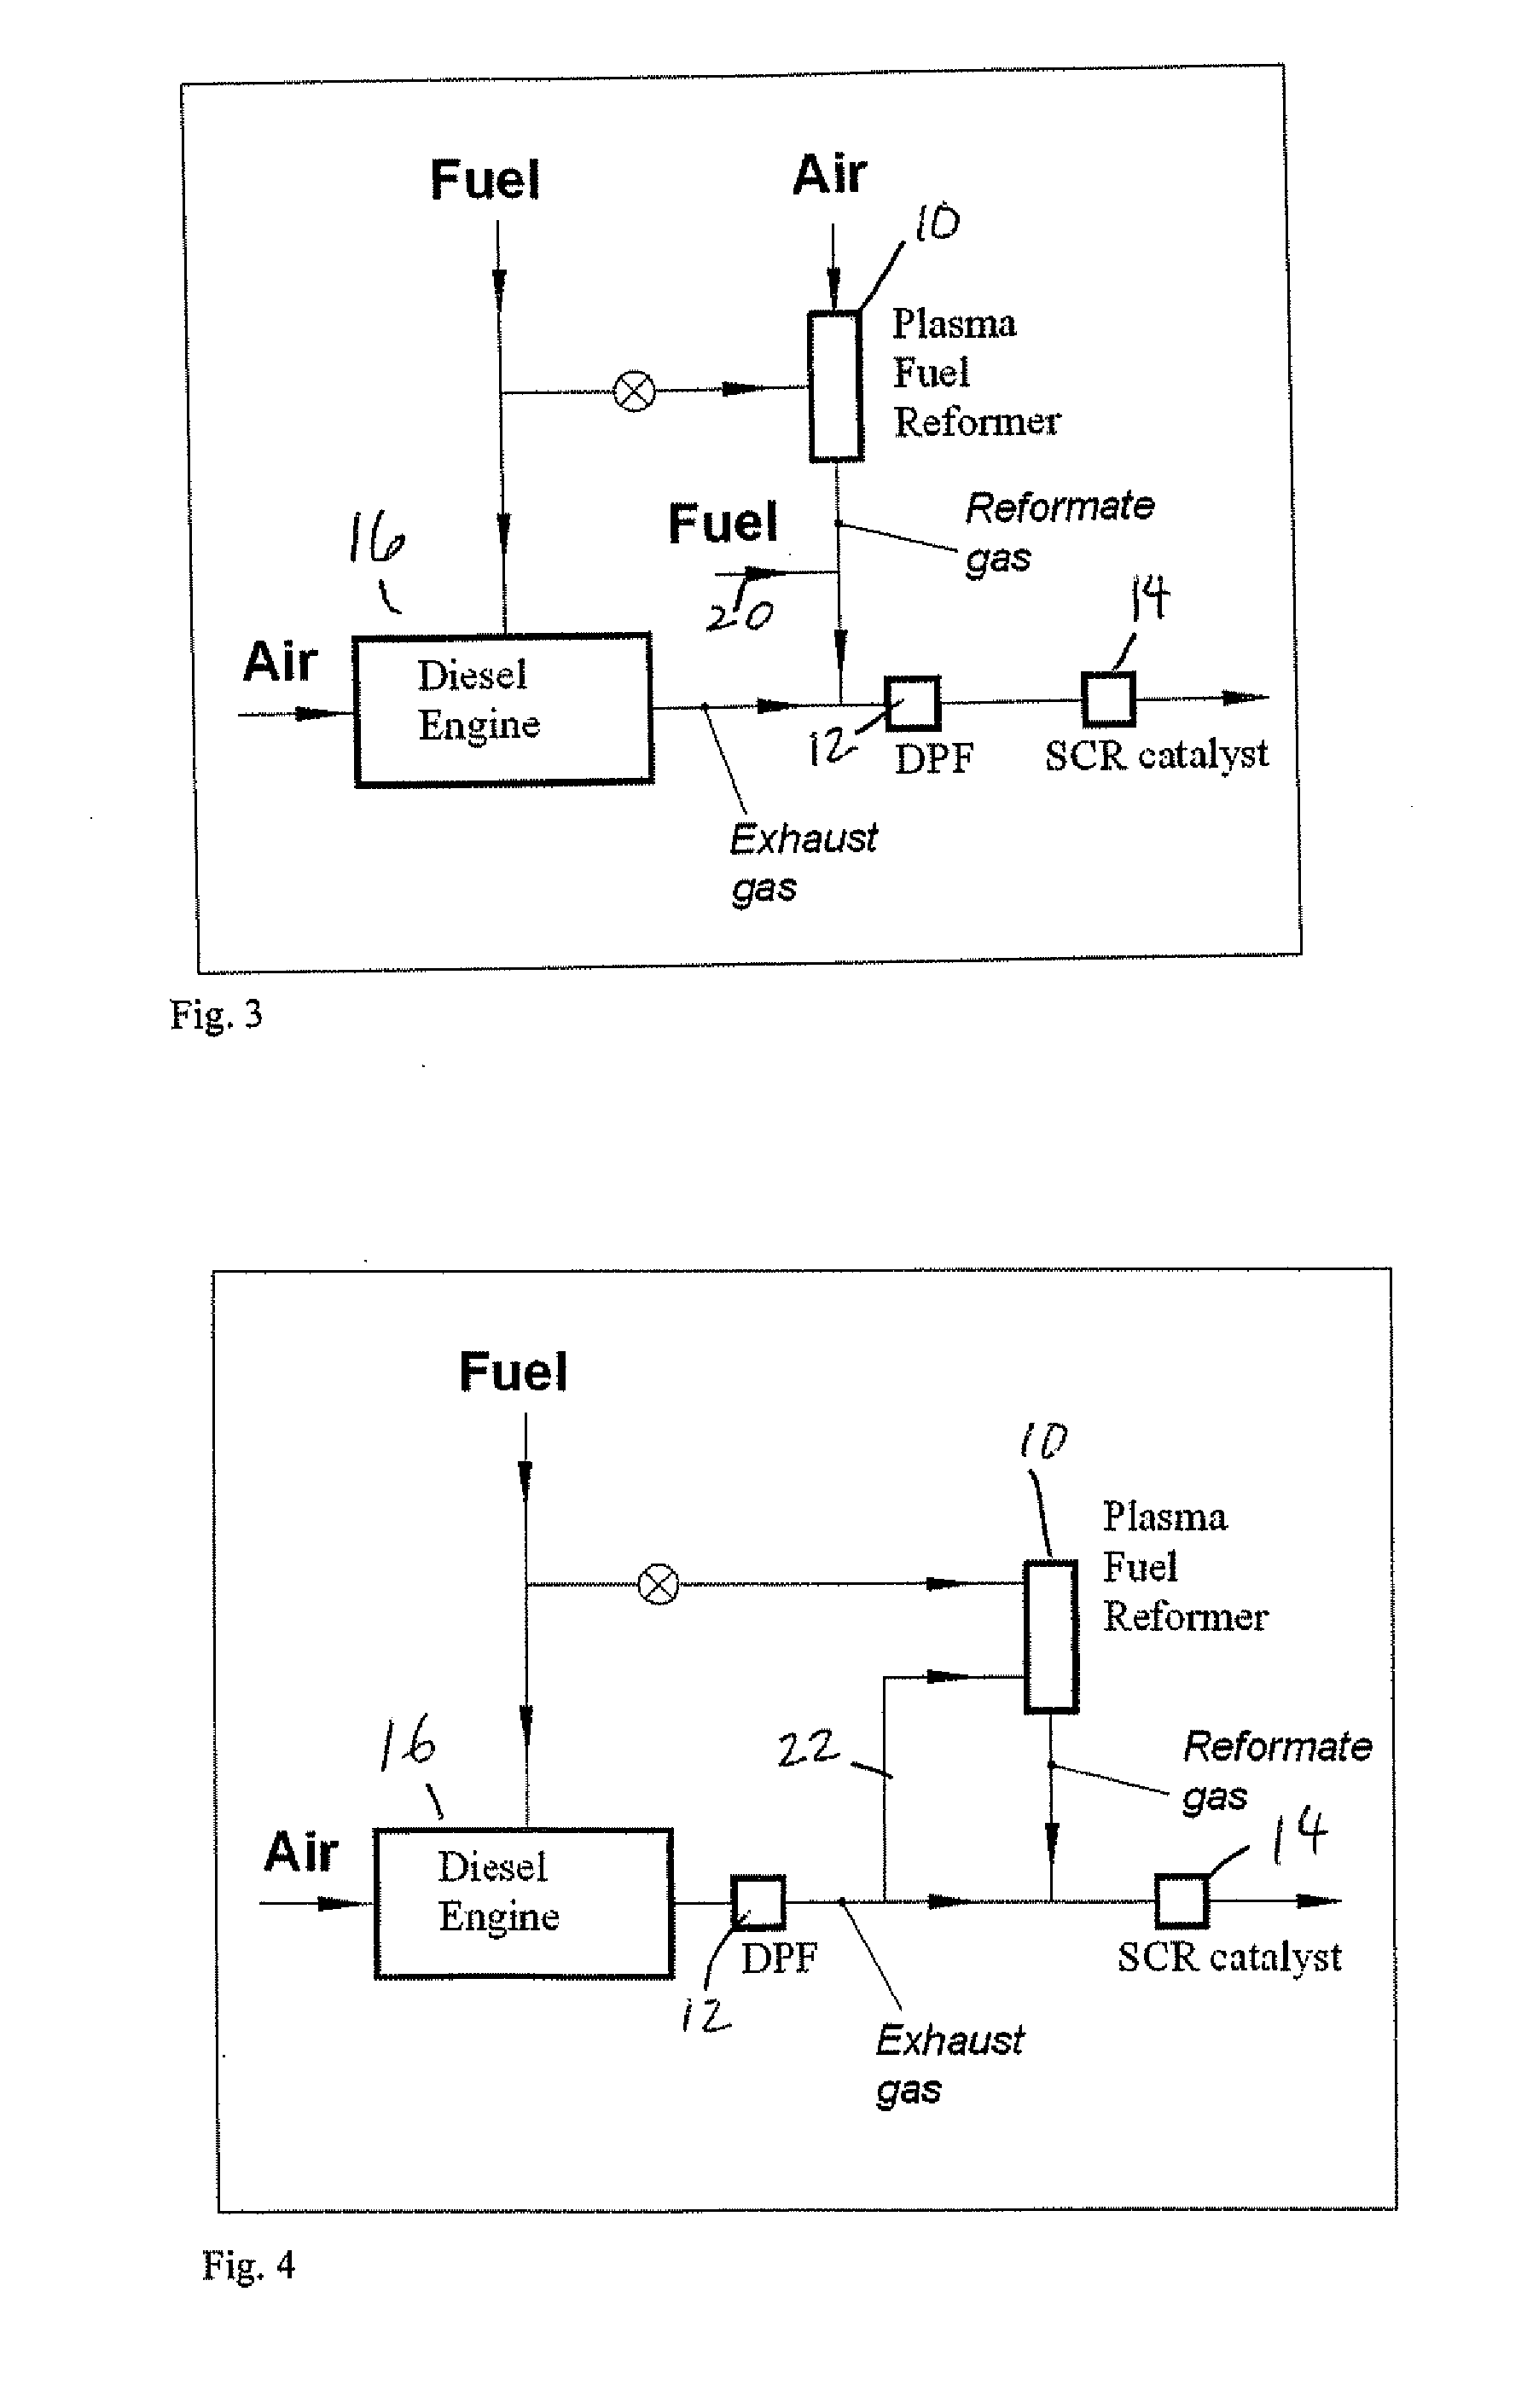 Apparatus and Method for NOx Reduction